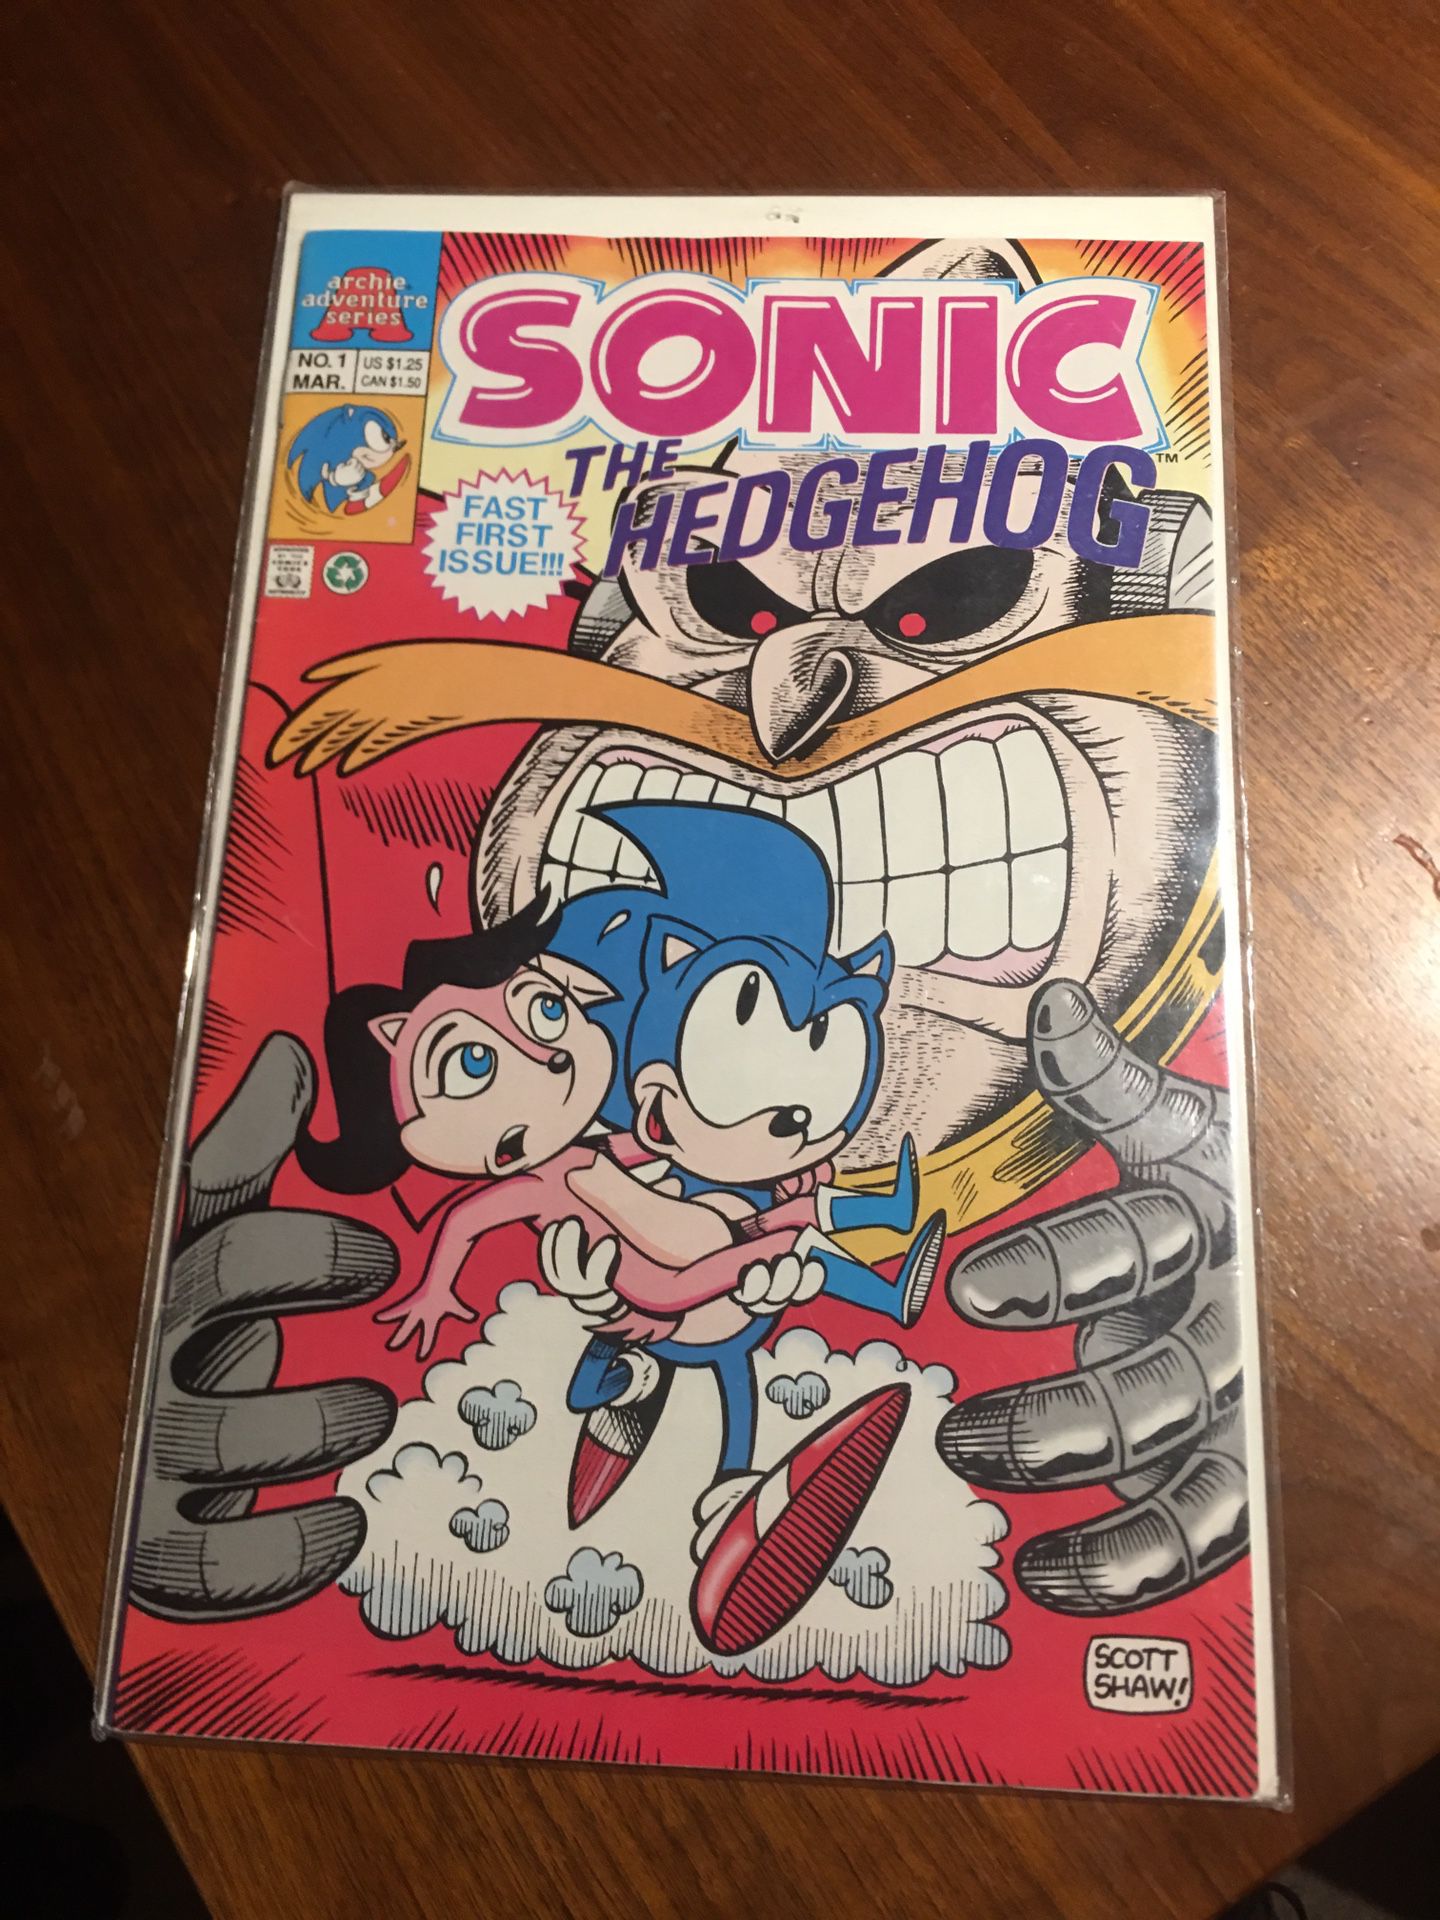 Sonic The Hedgehog #1 Archie Adventure Series (1993) Fast First Issue! RARE